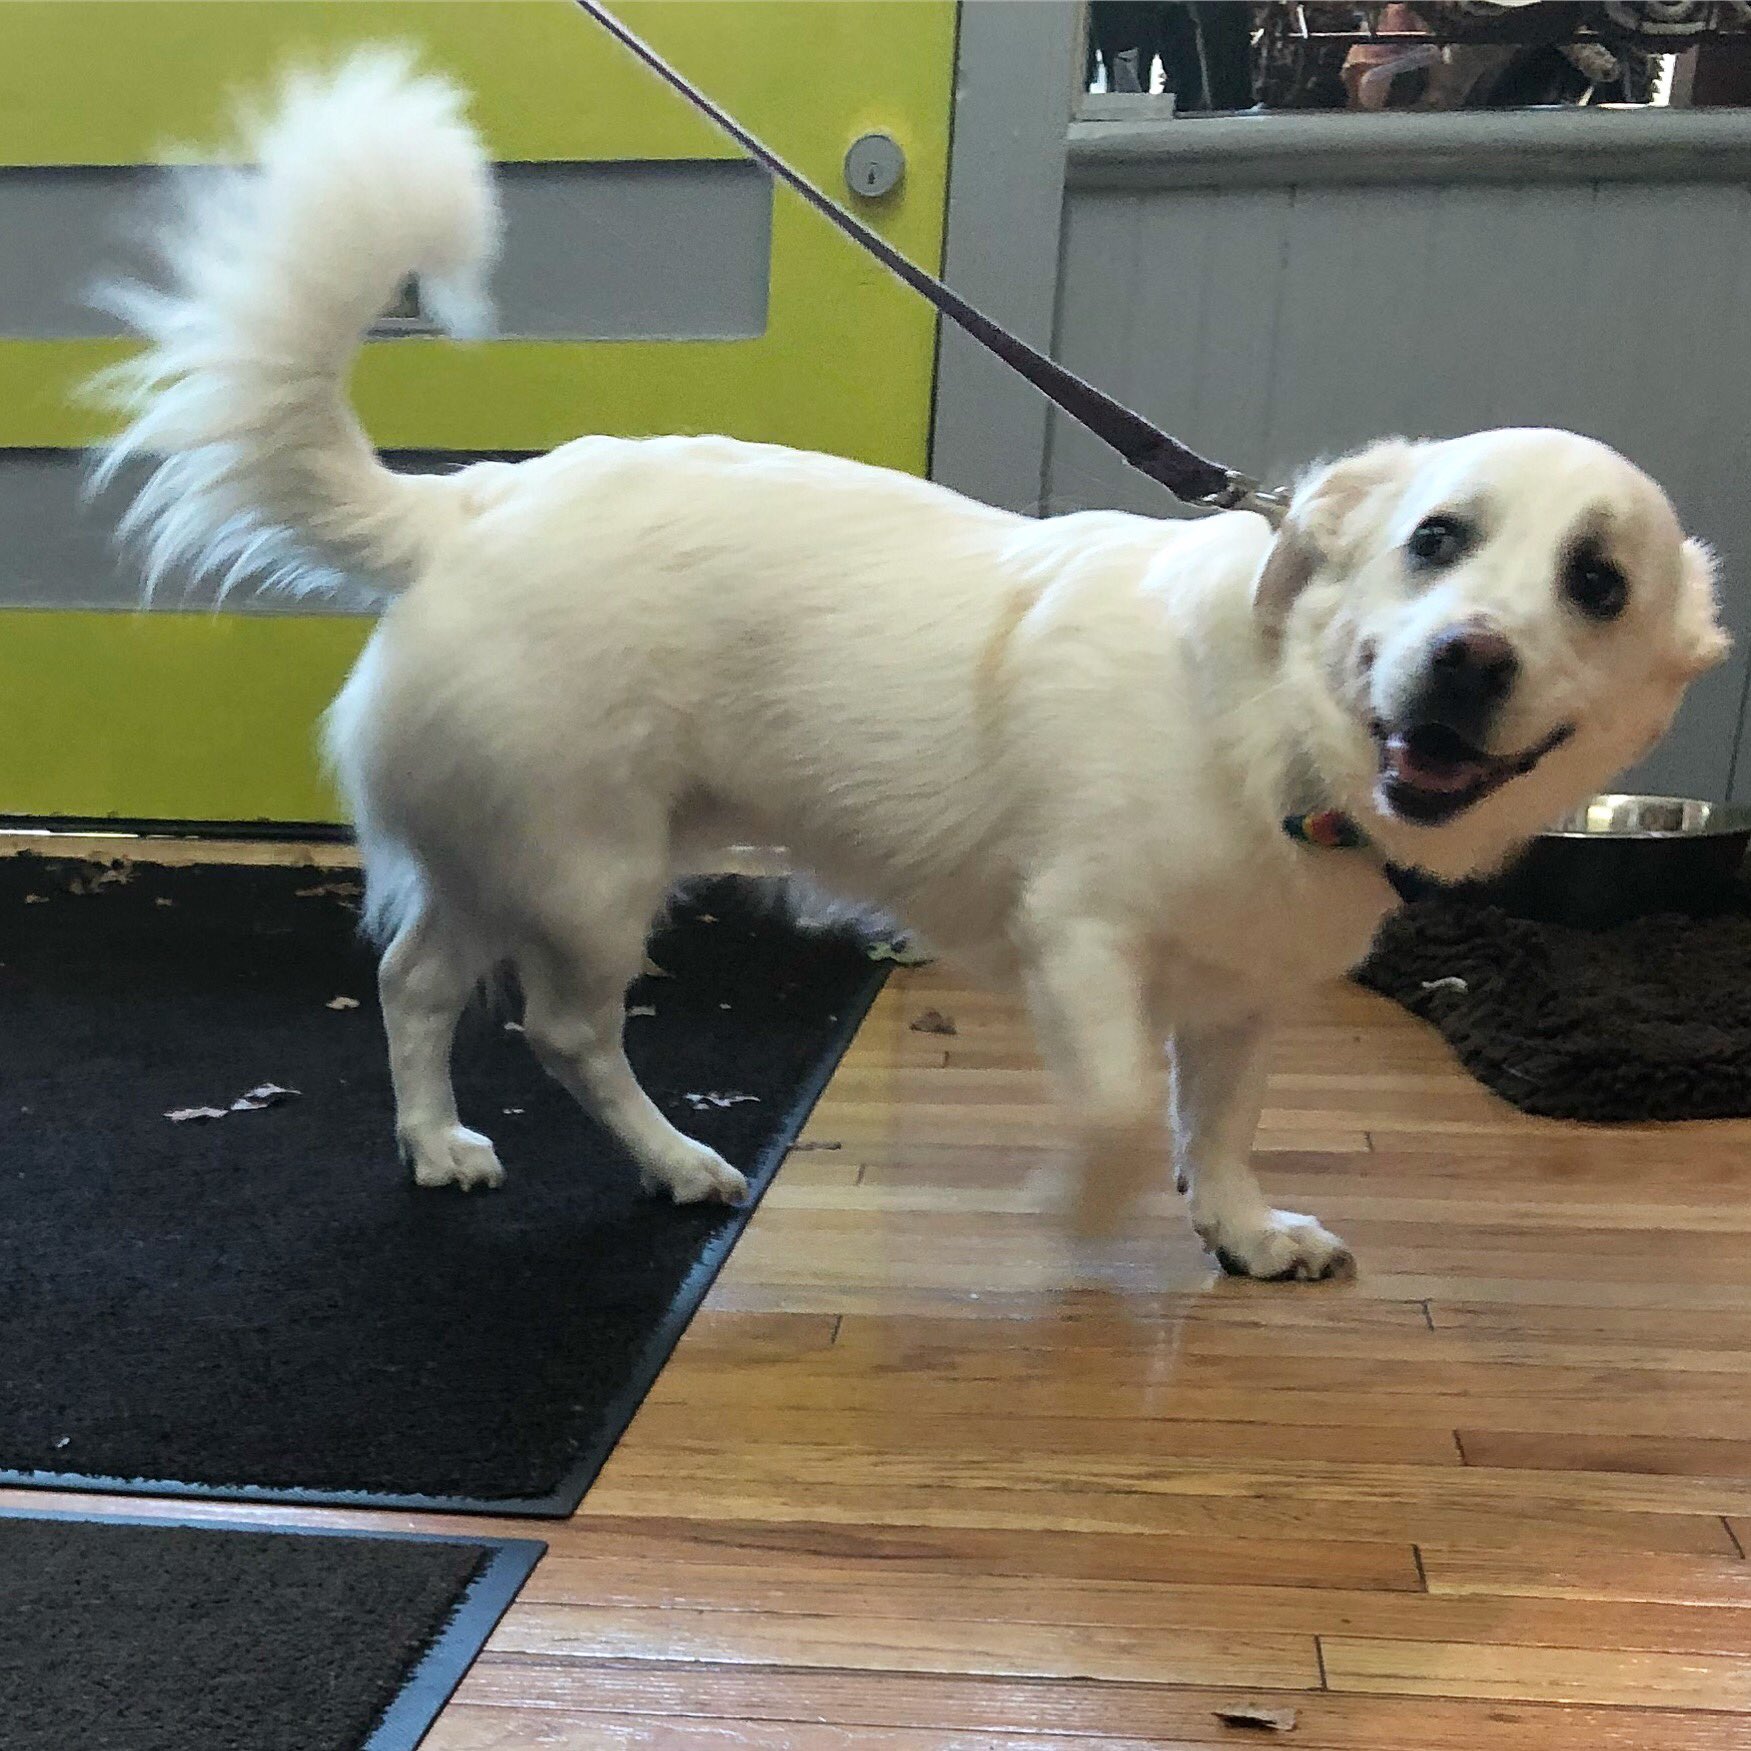 Lucky Dog Pet Grocery and Bakery on Twitter: "Percy came in to get new bow ties and a leash! He is a 1 a half year old x Great Pyrenees